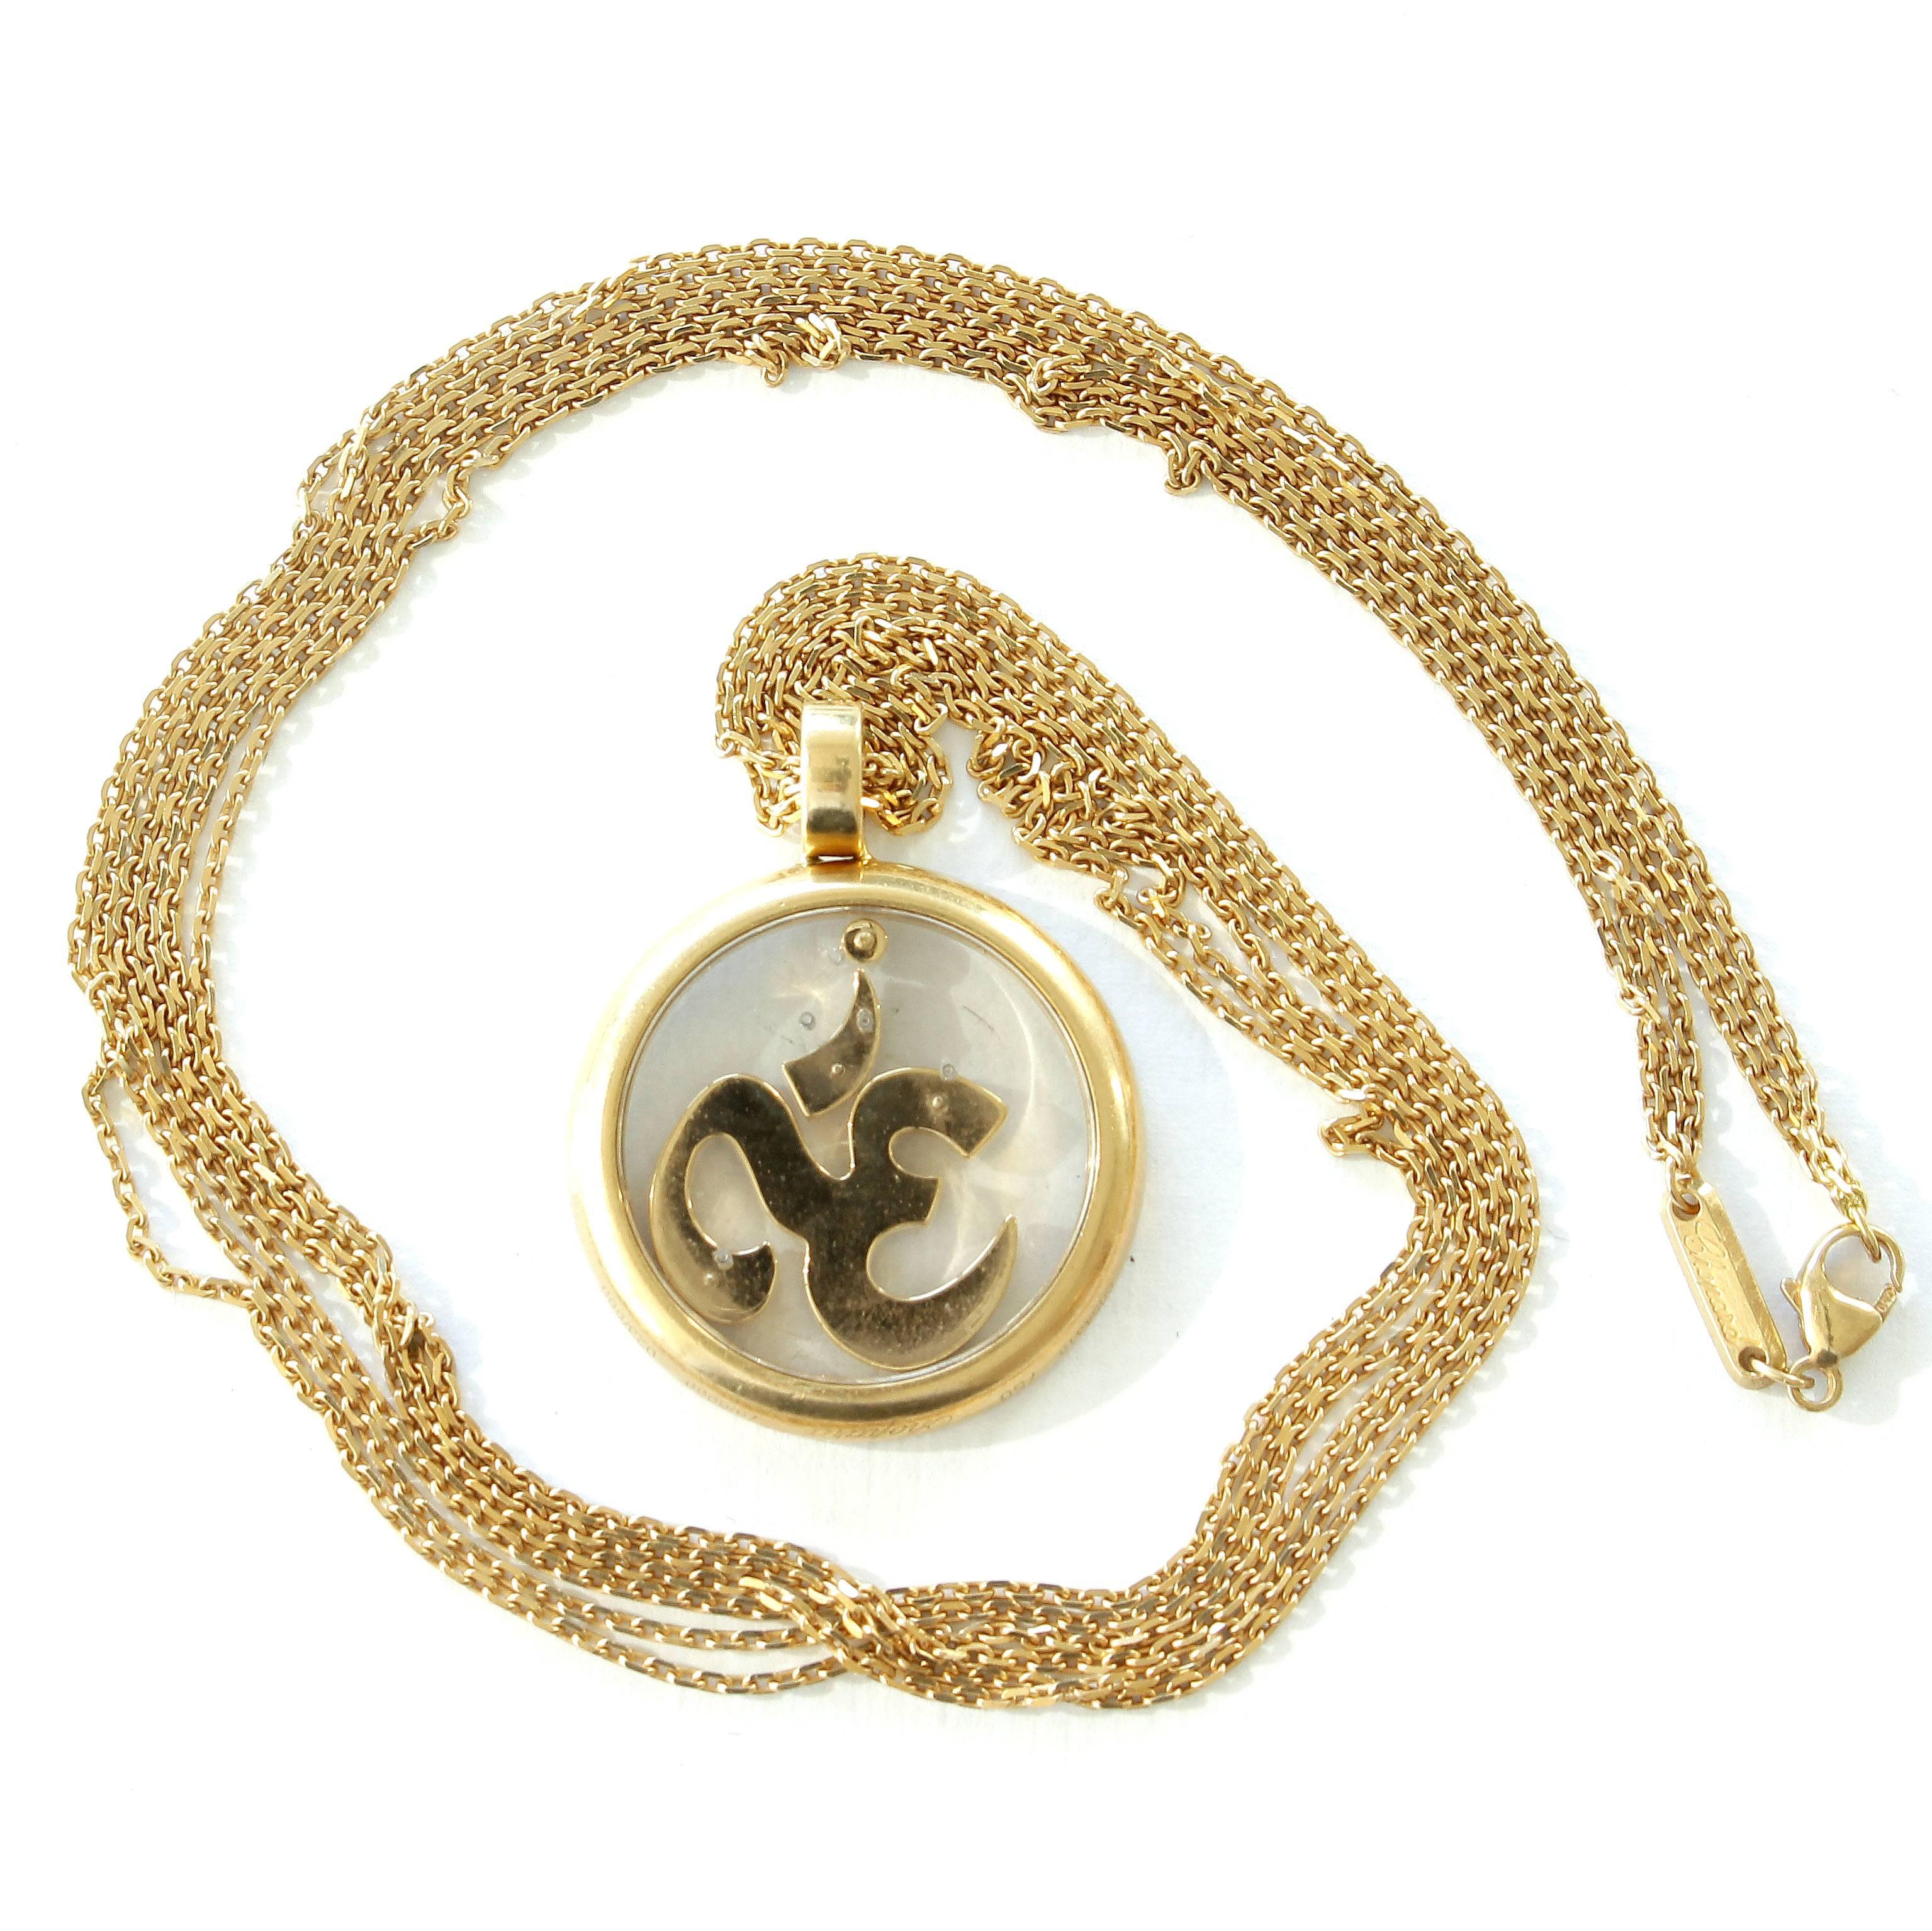 Chopard has brought  old world ideology into the modern spotlight.  Om is the most sacred mantra in Hinduism and Tibetan Buddhism.  Chanting Om is considered to quiet the nerves and elevate the spirit when done silently or with a group of friends.